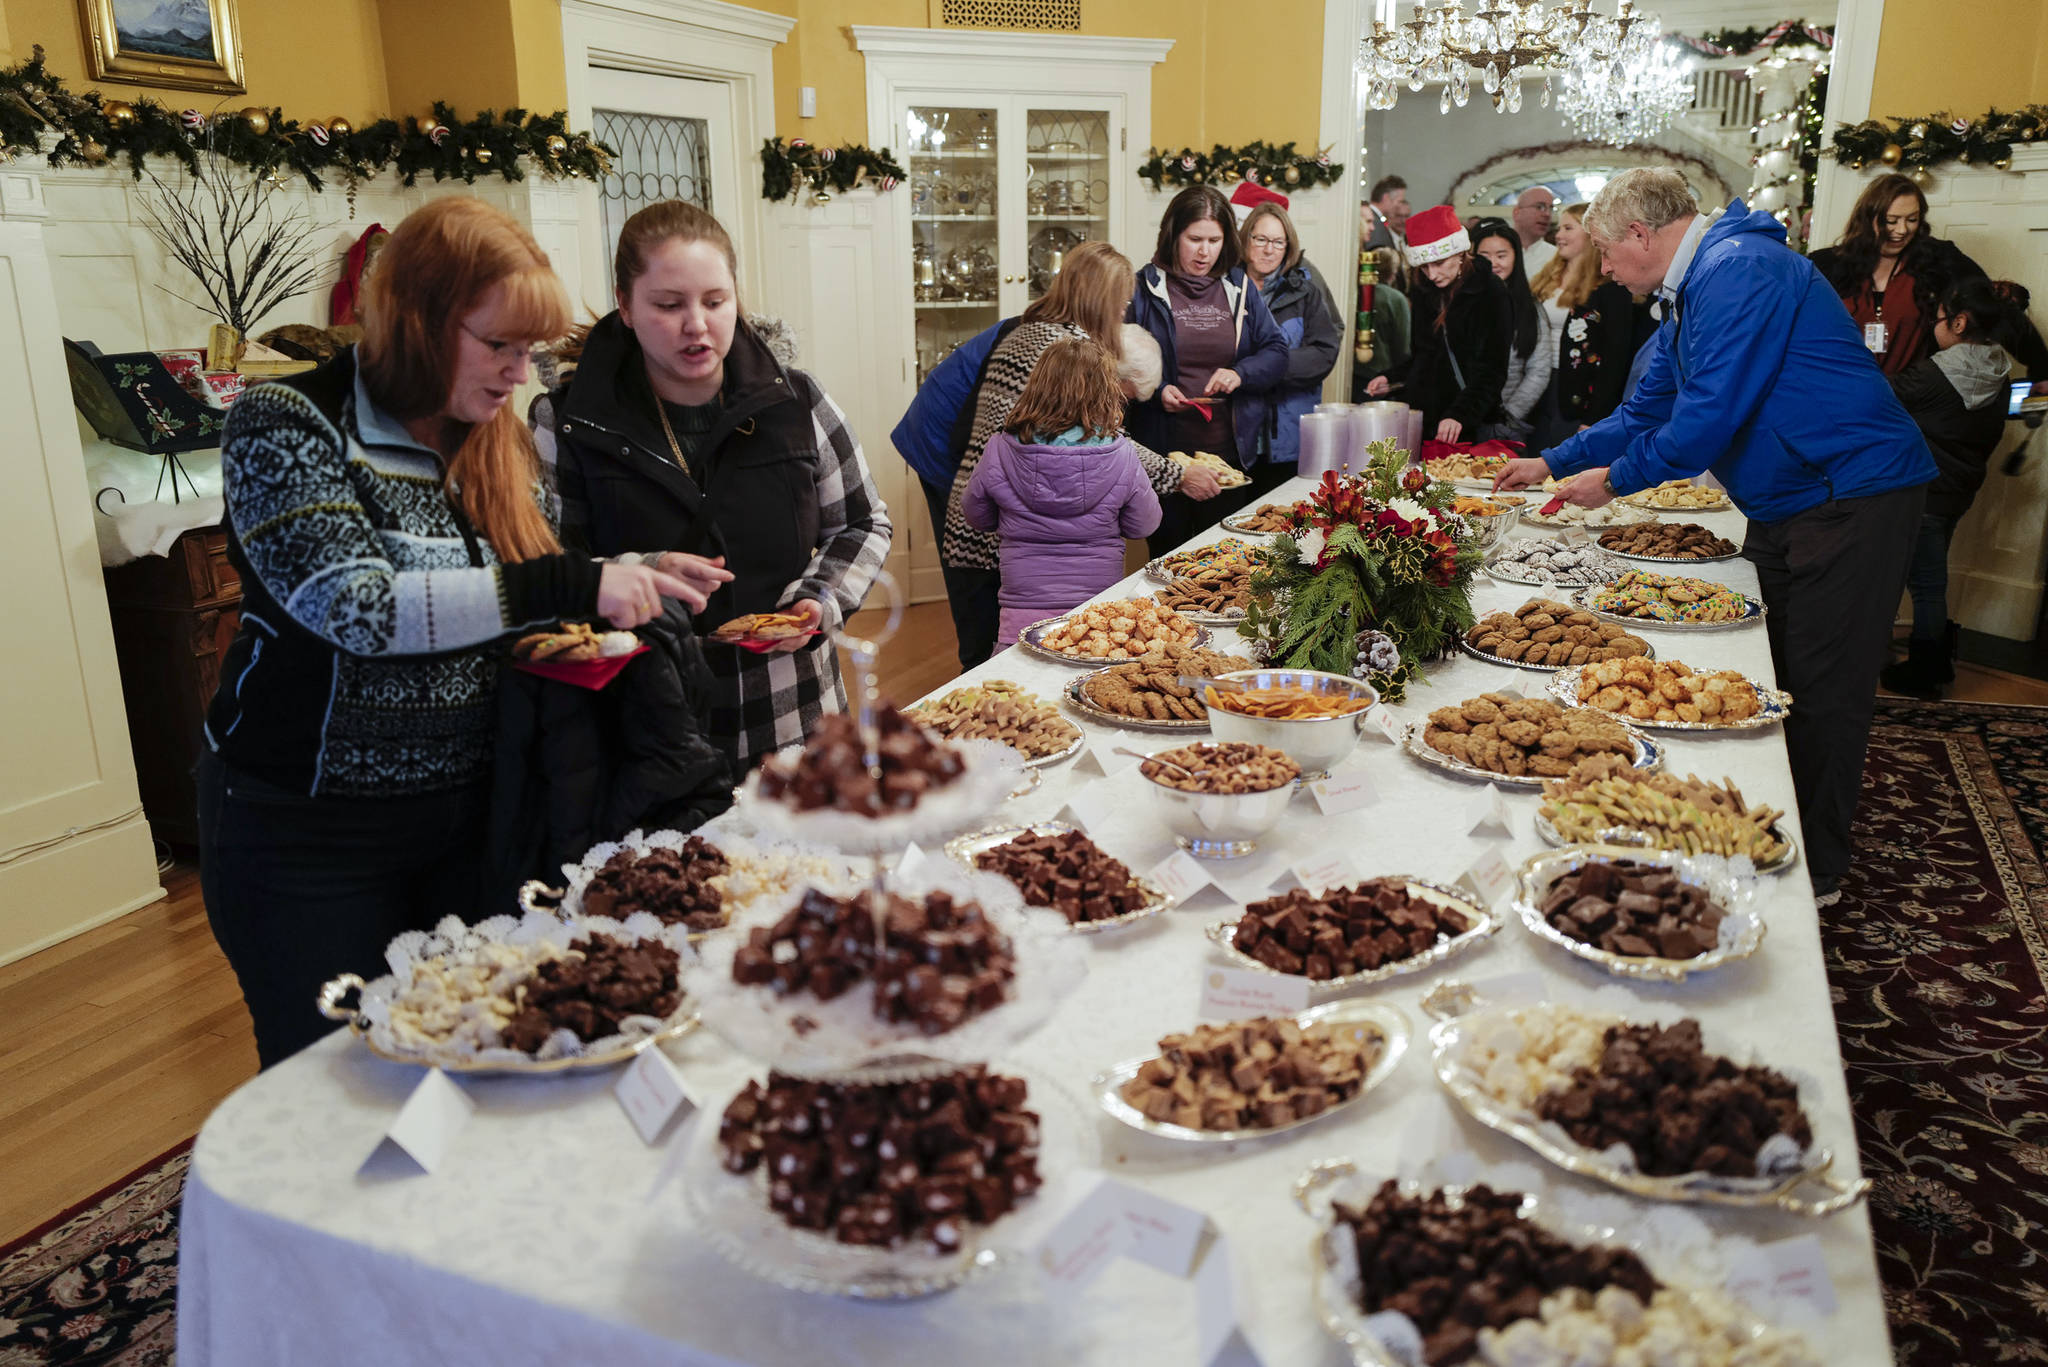 Juneau residents choose their cookies at the Governor’s Open House on Tuesday, Dec. 10, 2019. (Michael Penn | Juneau Empire)